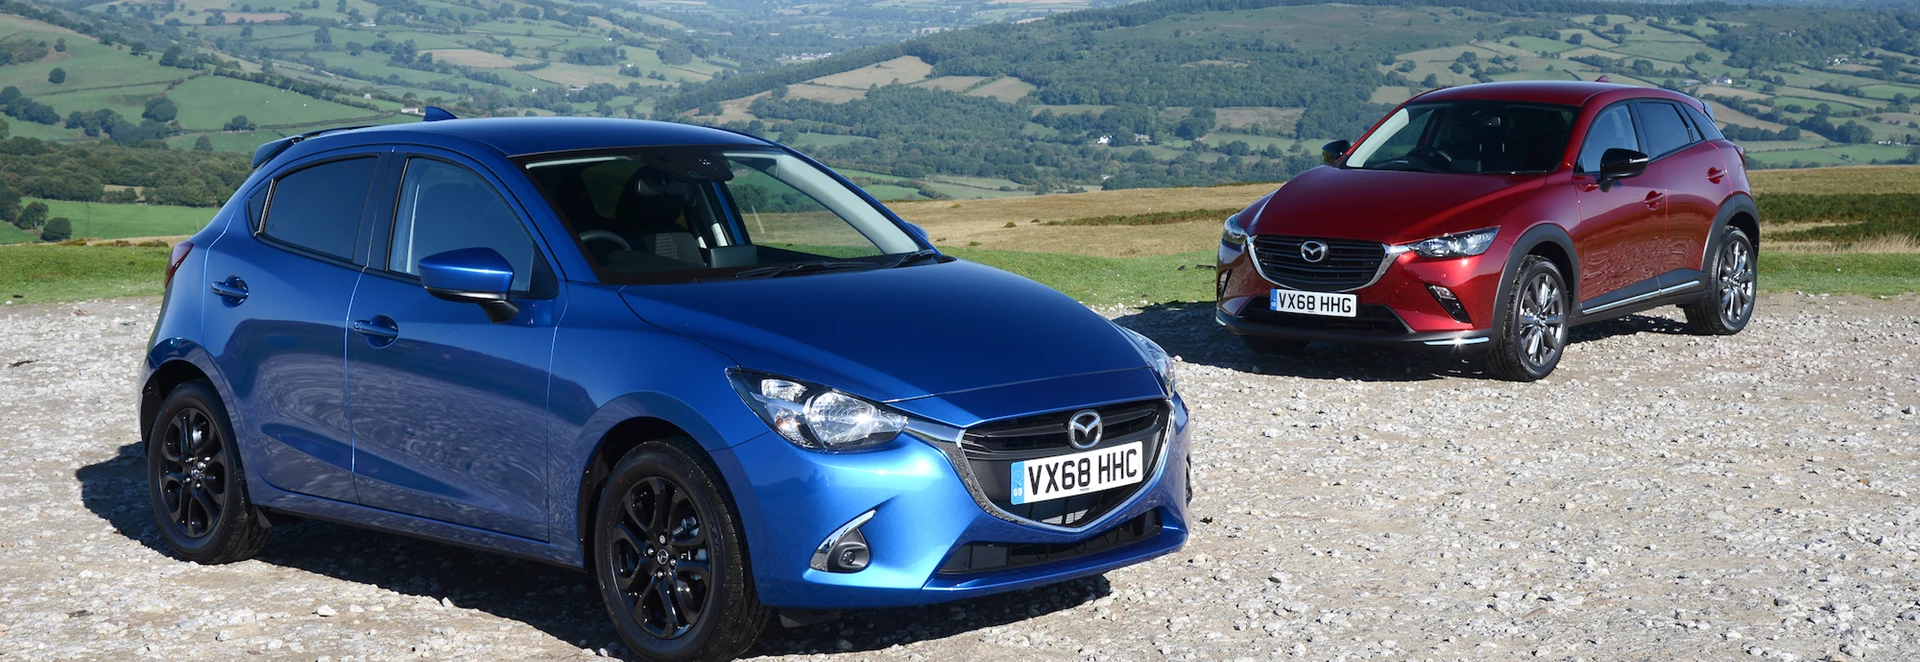 Mazda introduces special edition models for Autumn